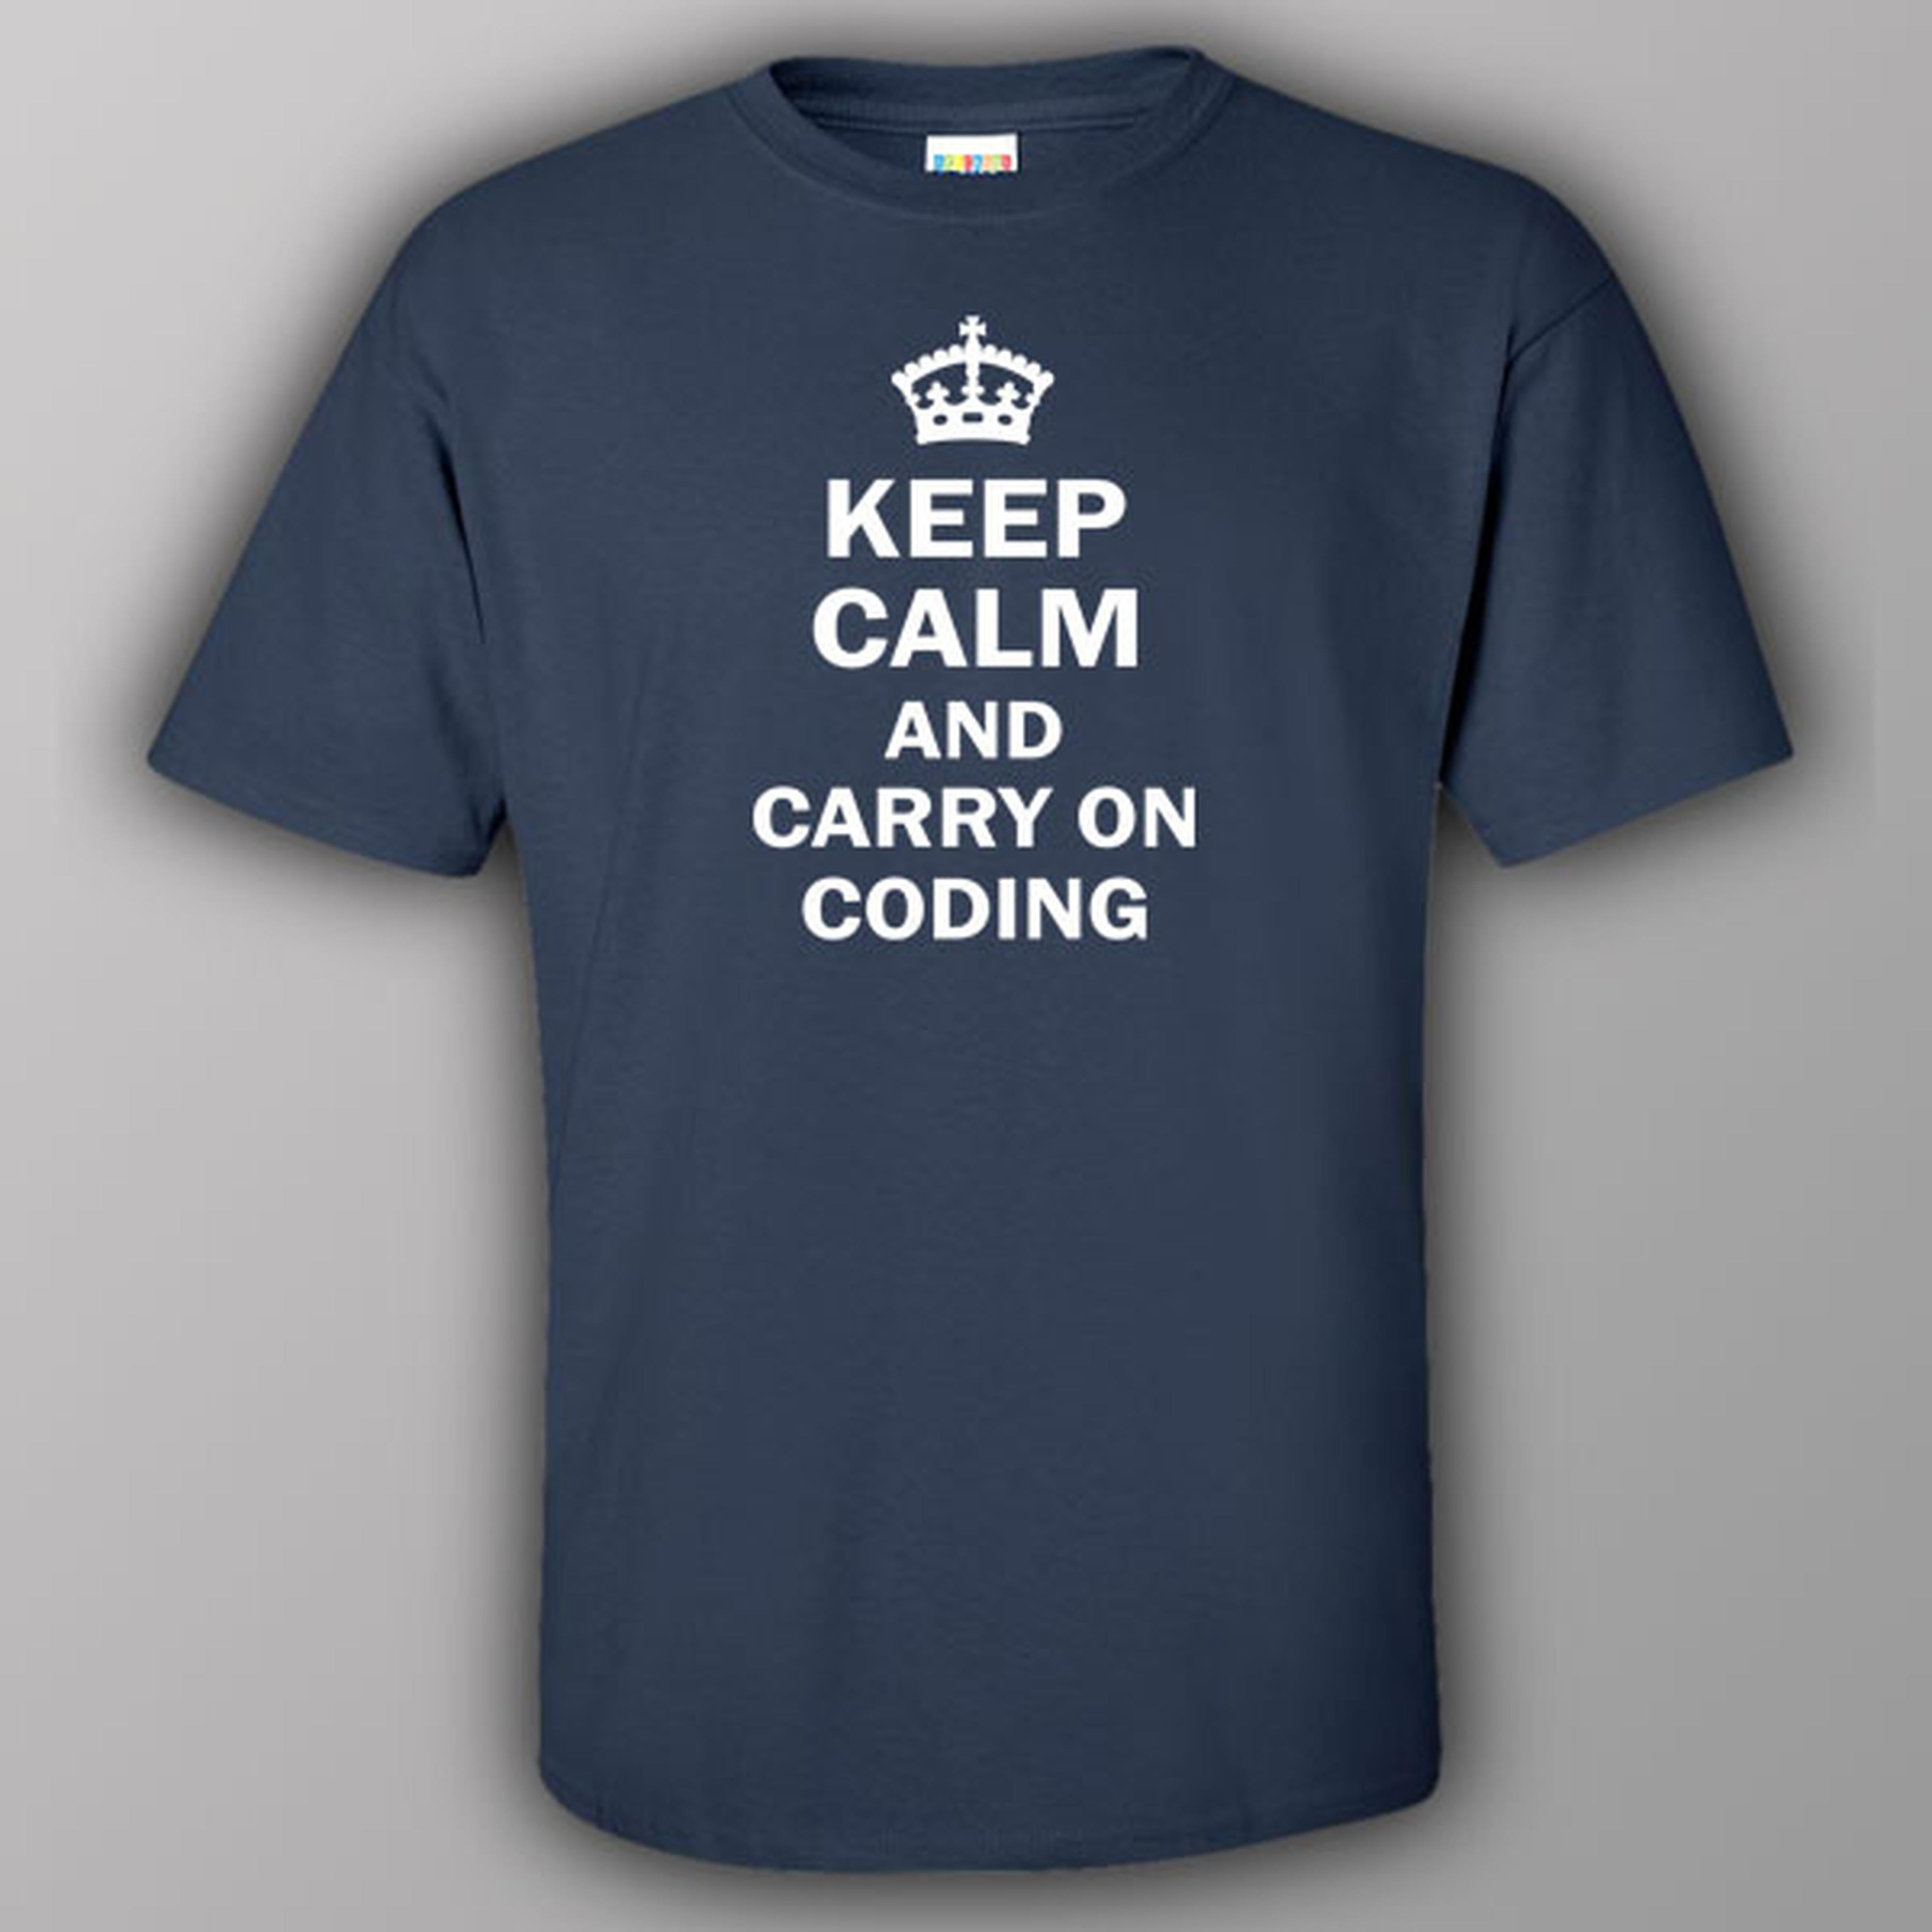 Keep calm and carry on coding - T-shirt